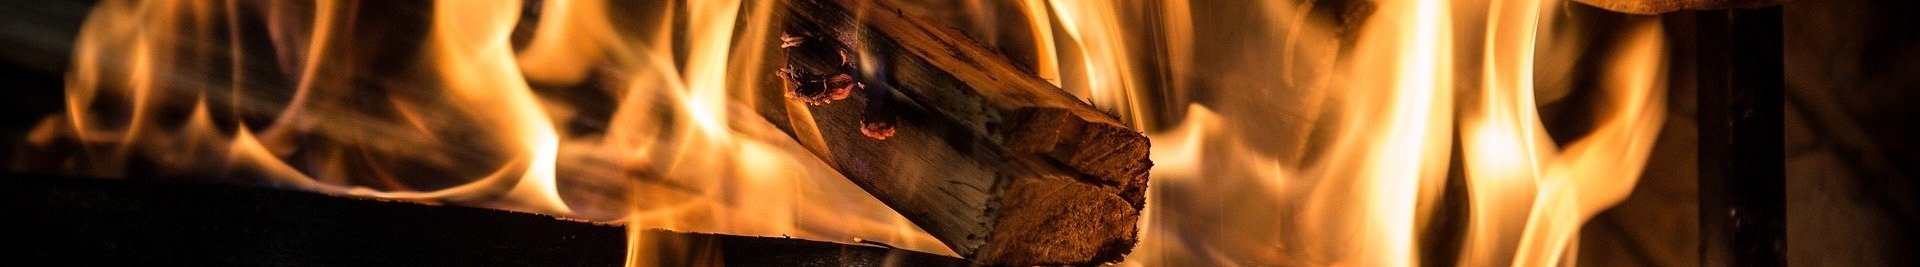 Where To Start With A Fireplace Restoration